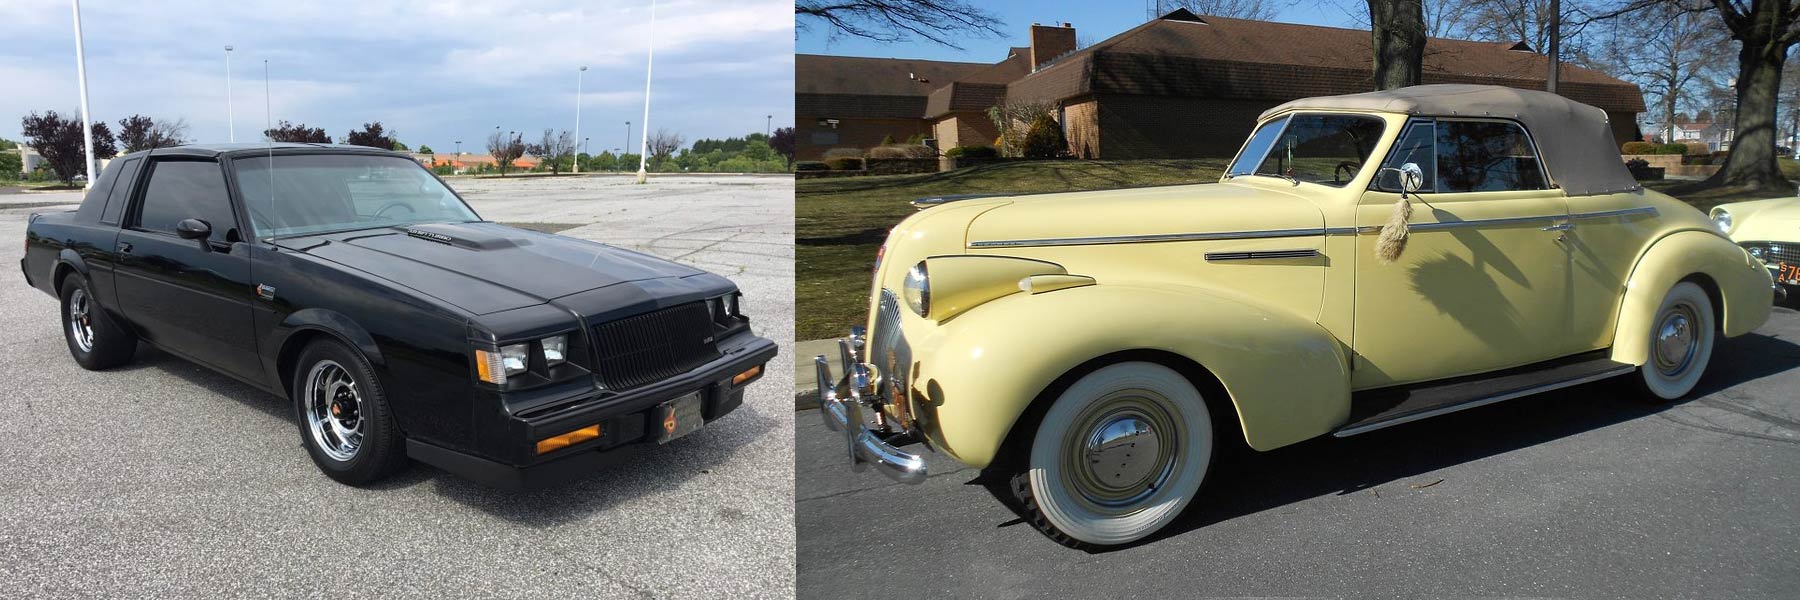 Collage of two vintage cars